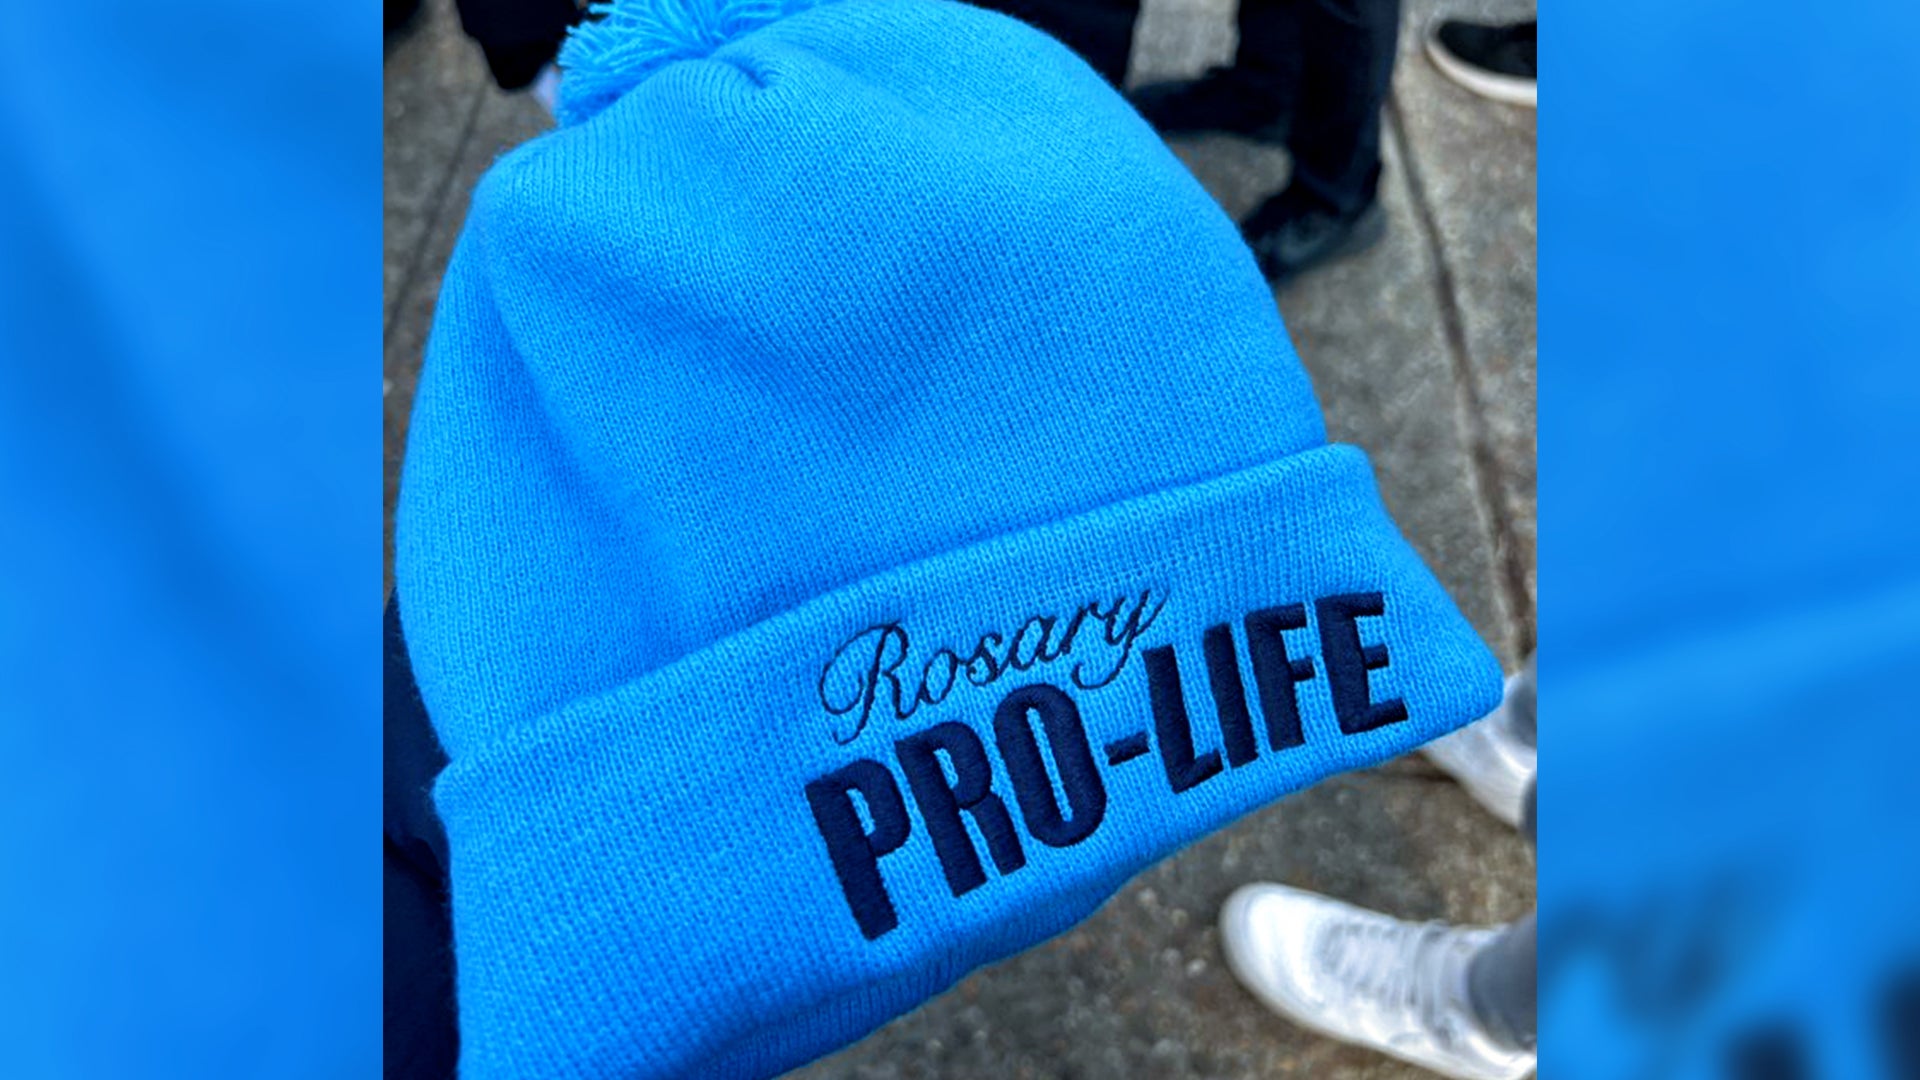 Smithsonian Apologizes for Kicking Out Catholic Students Wearing Hats with Pro-Life Message